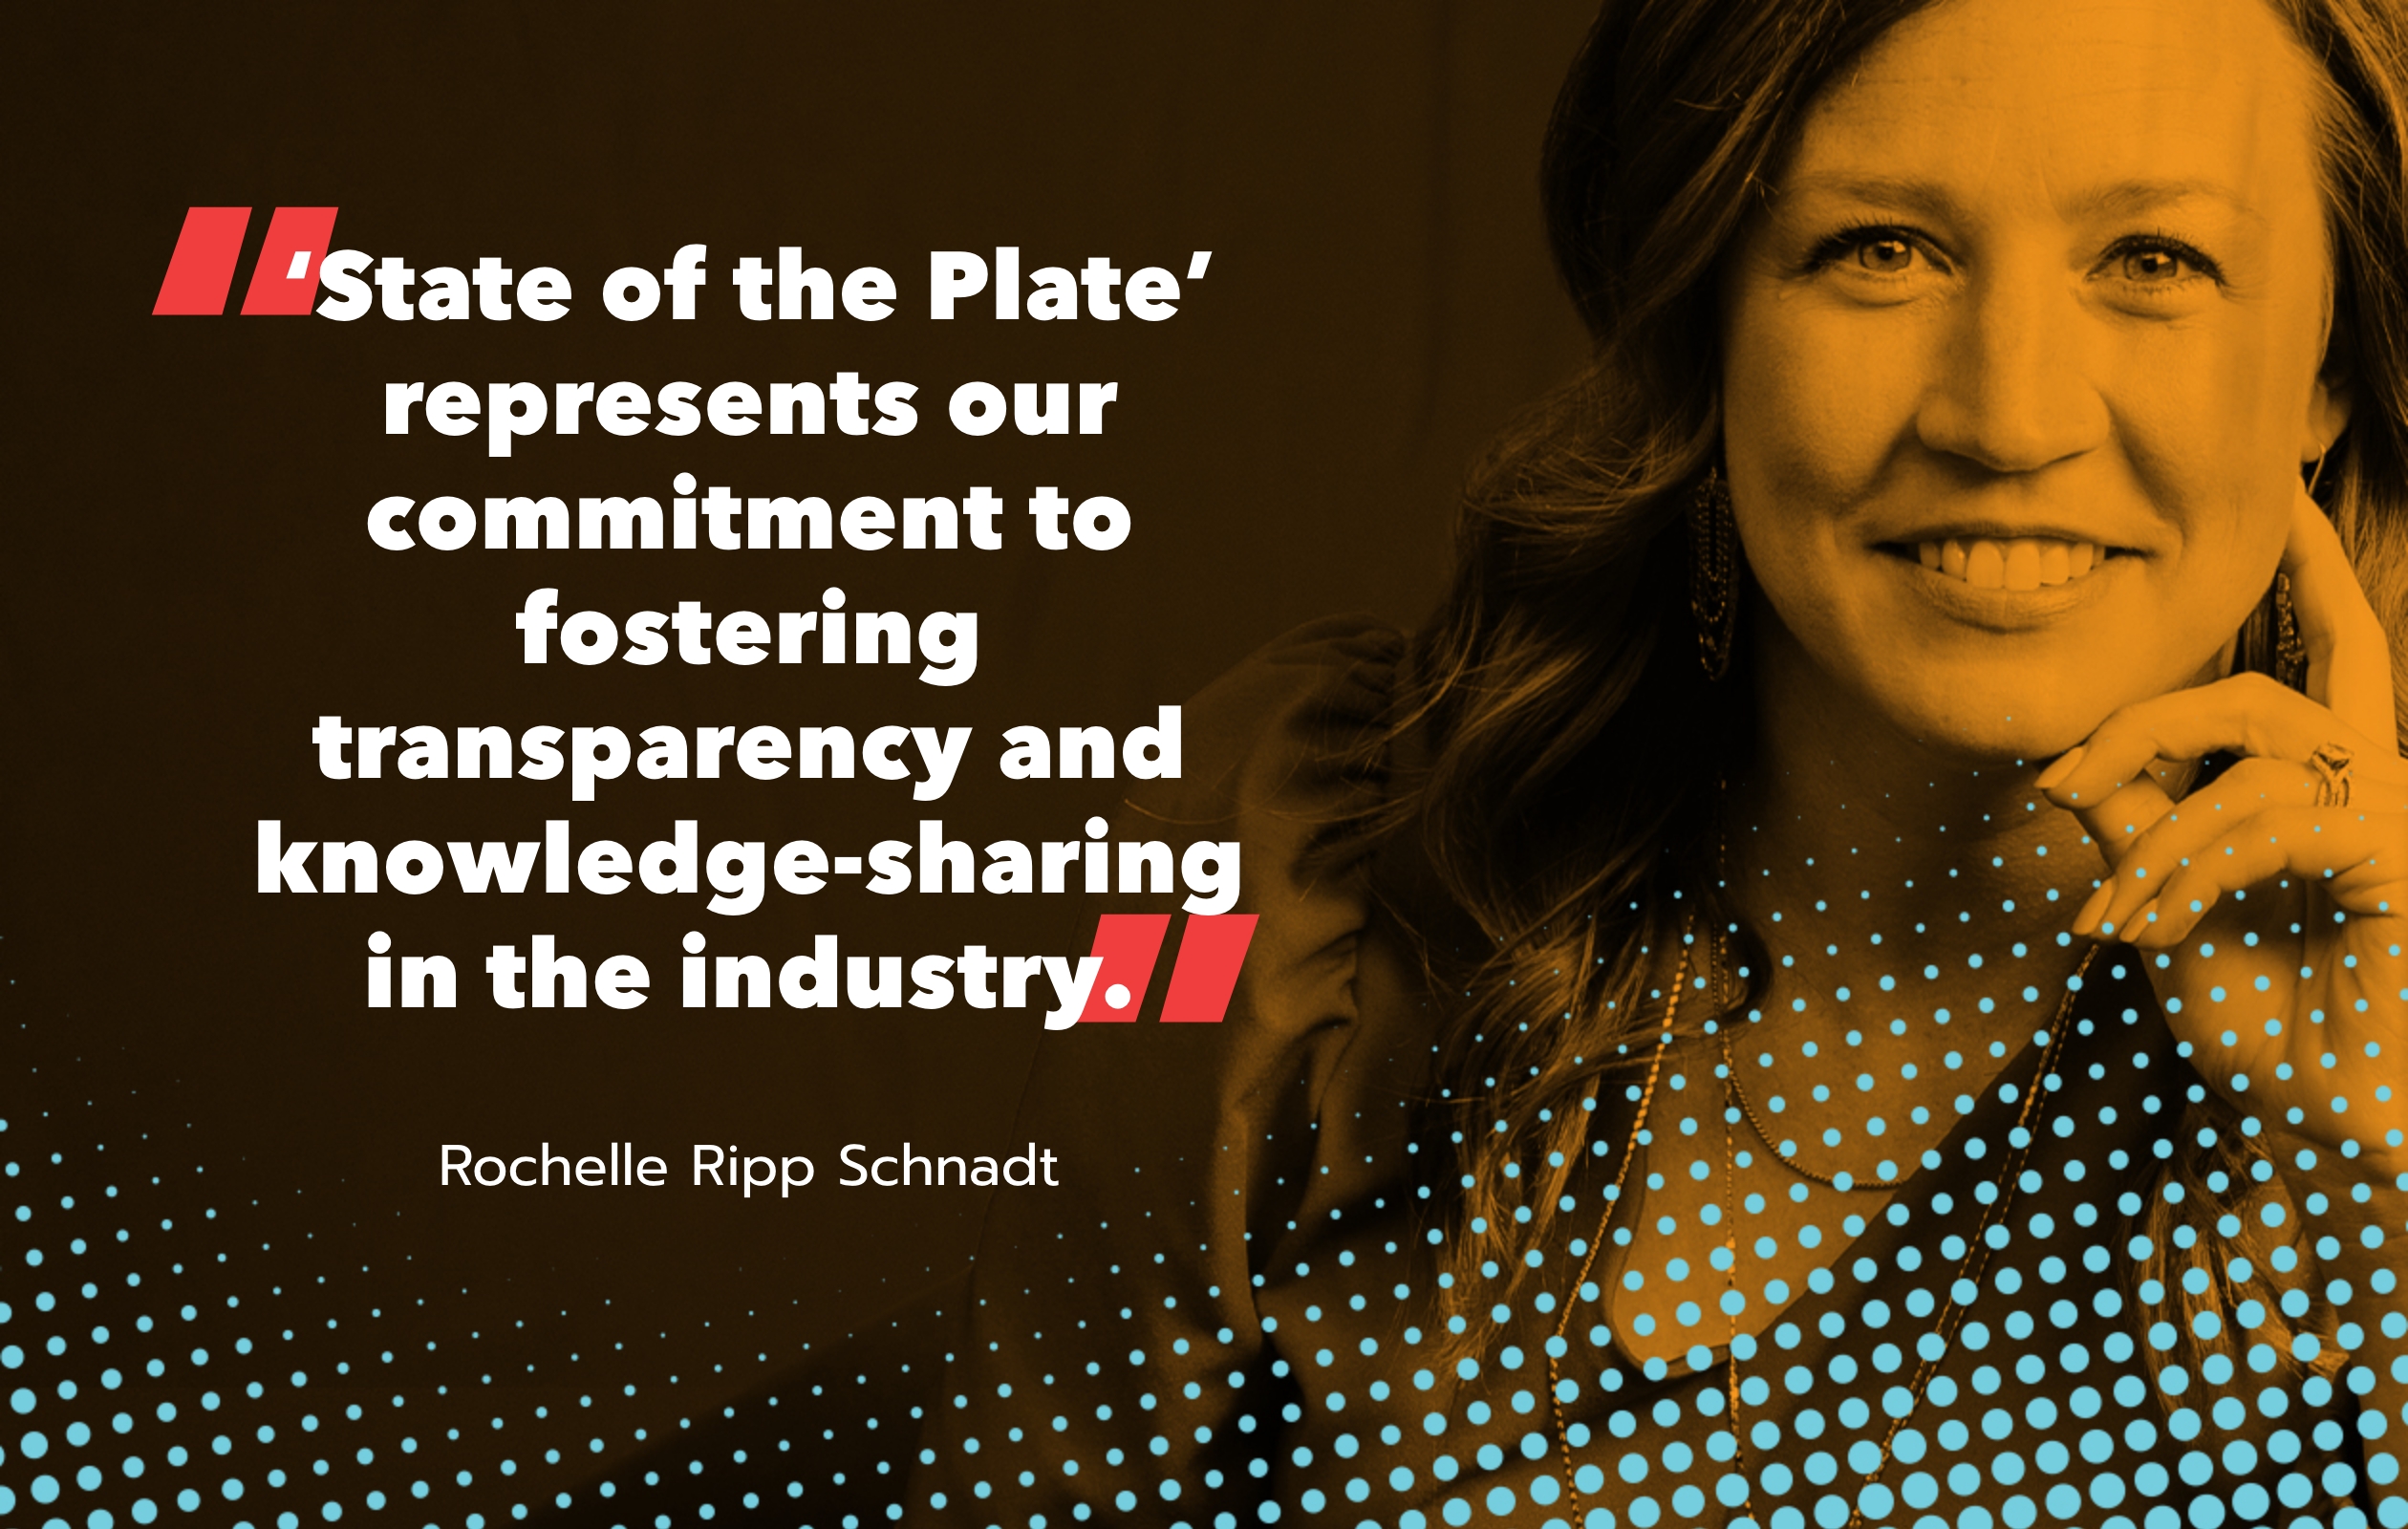 "‘State of the Plate’ represents our commitment to fostering transparency and knowledge-sharing in the industry." - Rochelle Ripp Schnadt